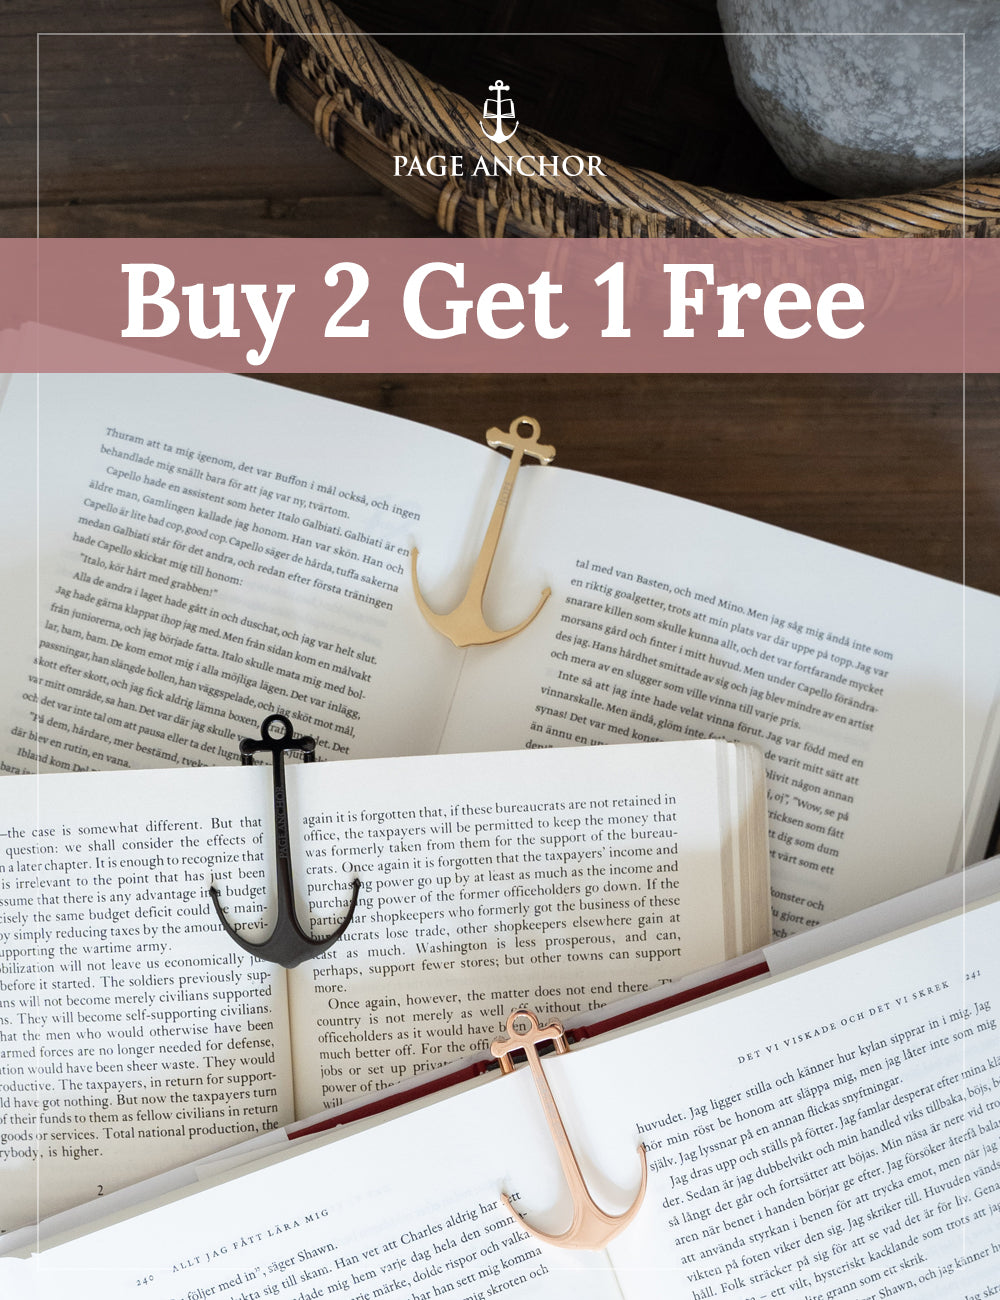 Buy Two, Get One Free